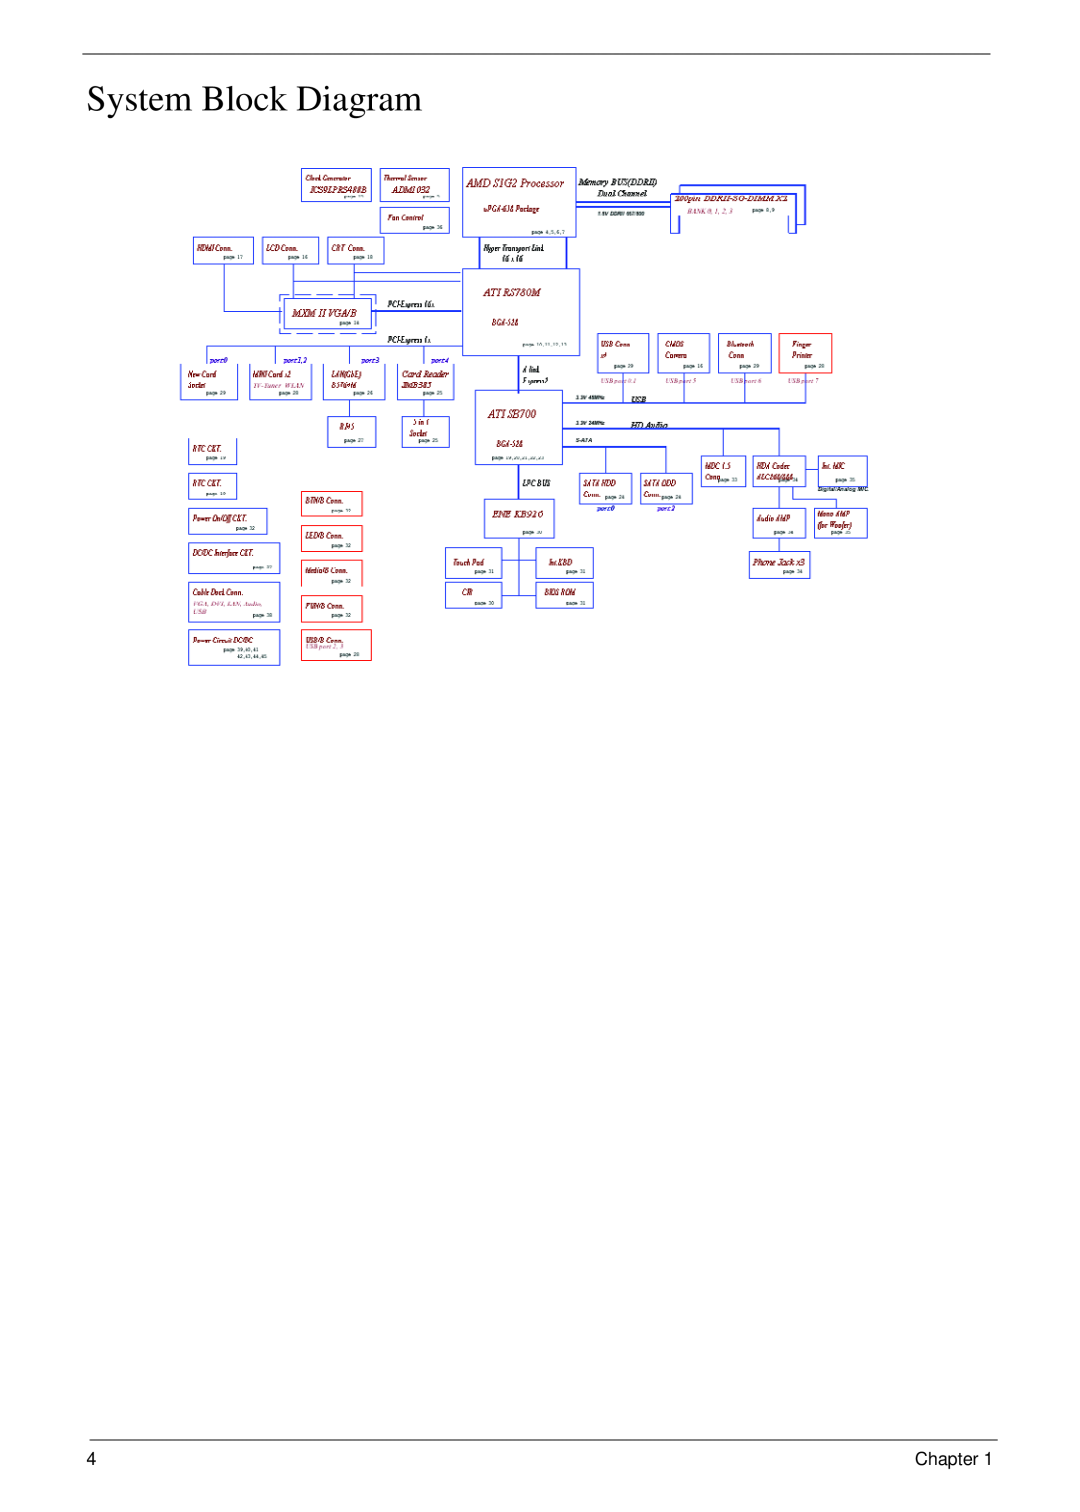 Acer 5530G manual System Block Diagram, Chapter 